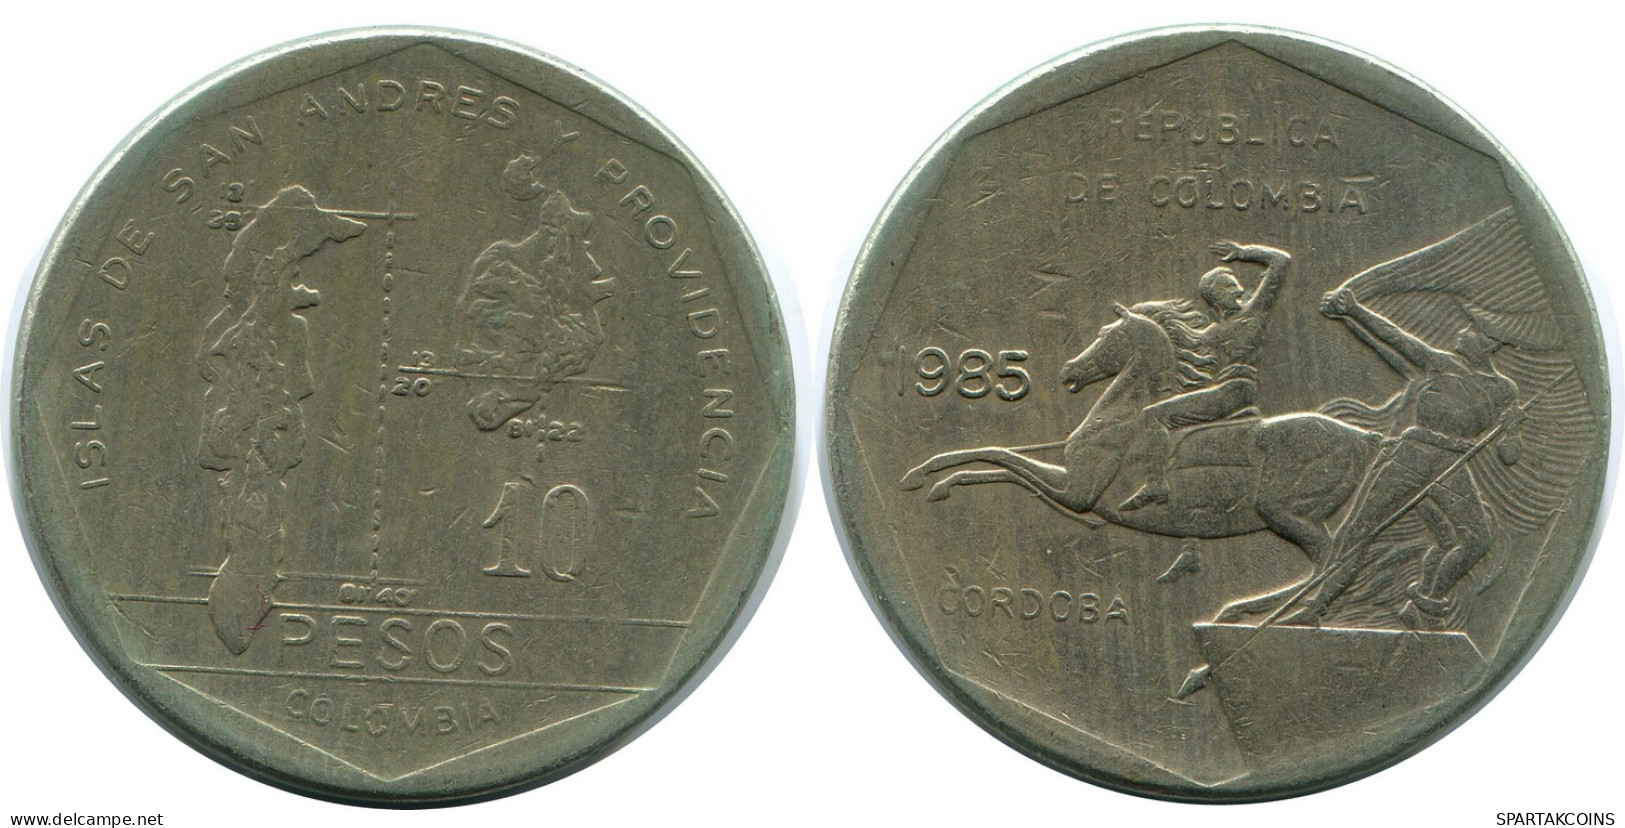 10 PESOS 1985 COLOMBIA Coin #AR919.U.A - Colombie